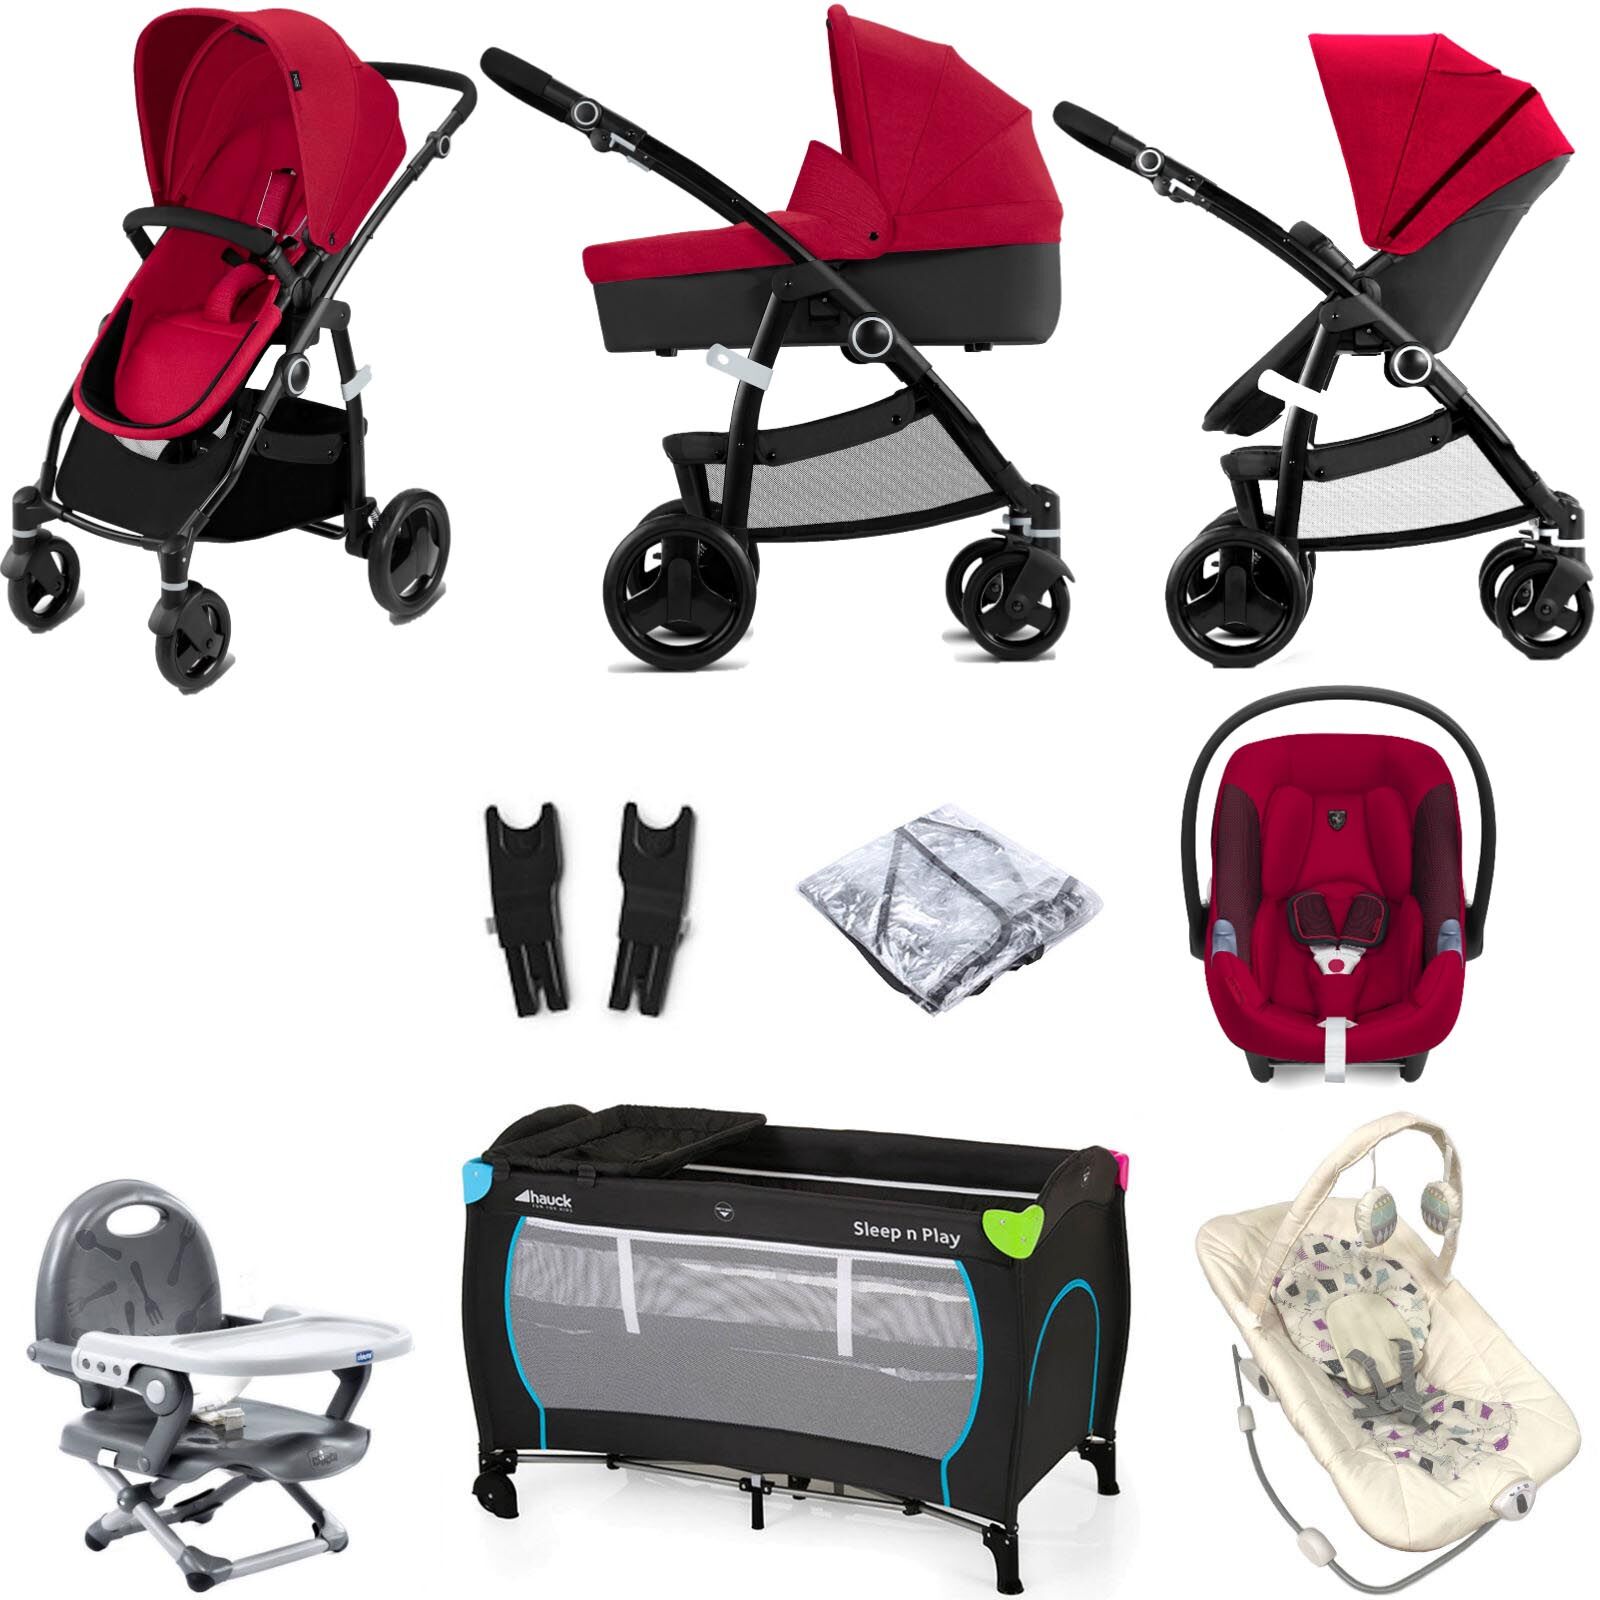 CBX Cybex CBX Leotie Pure (Aton M i-Size) Everything You Need Travel System Bundle with Carrycot - Crunchy Red